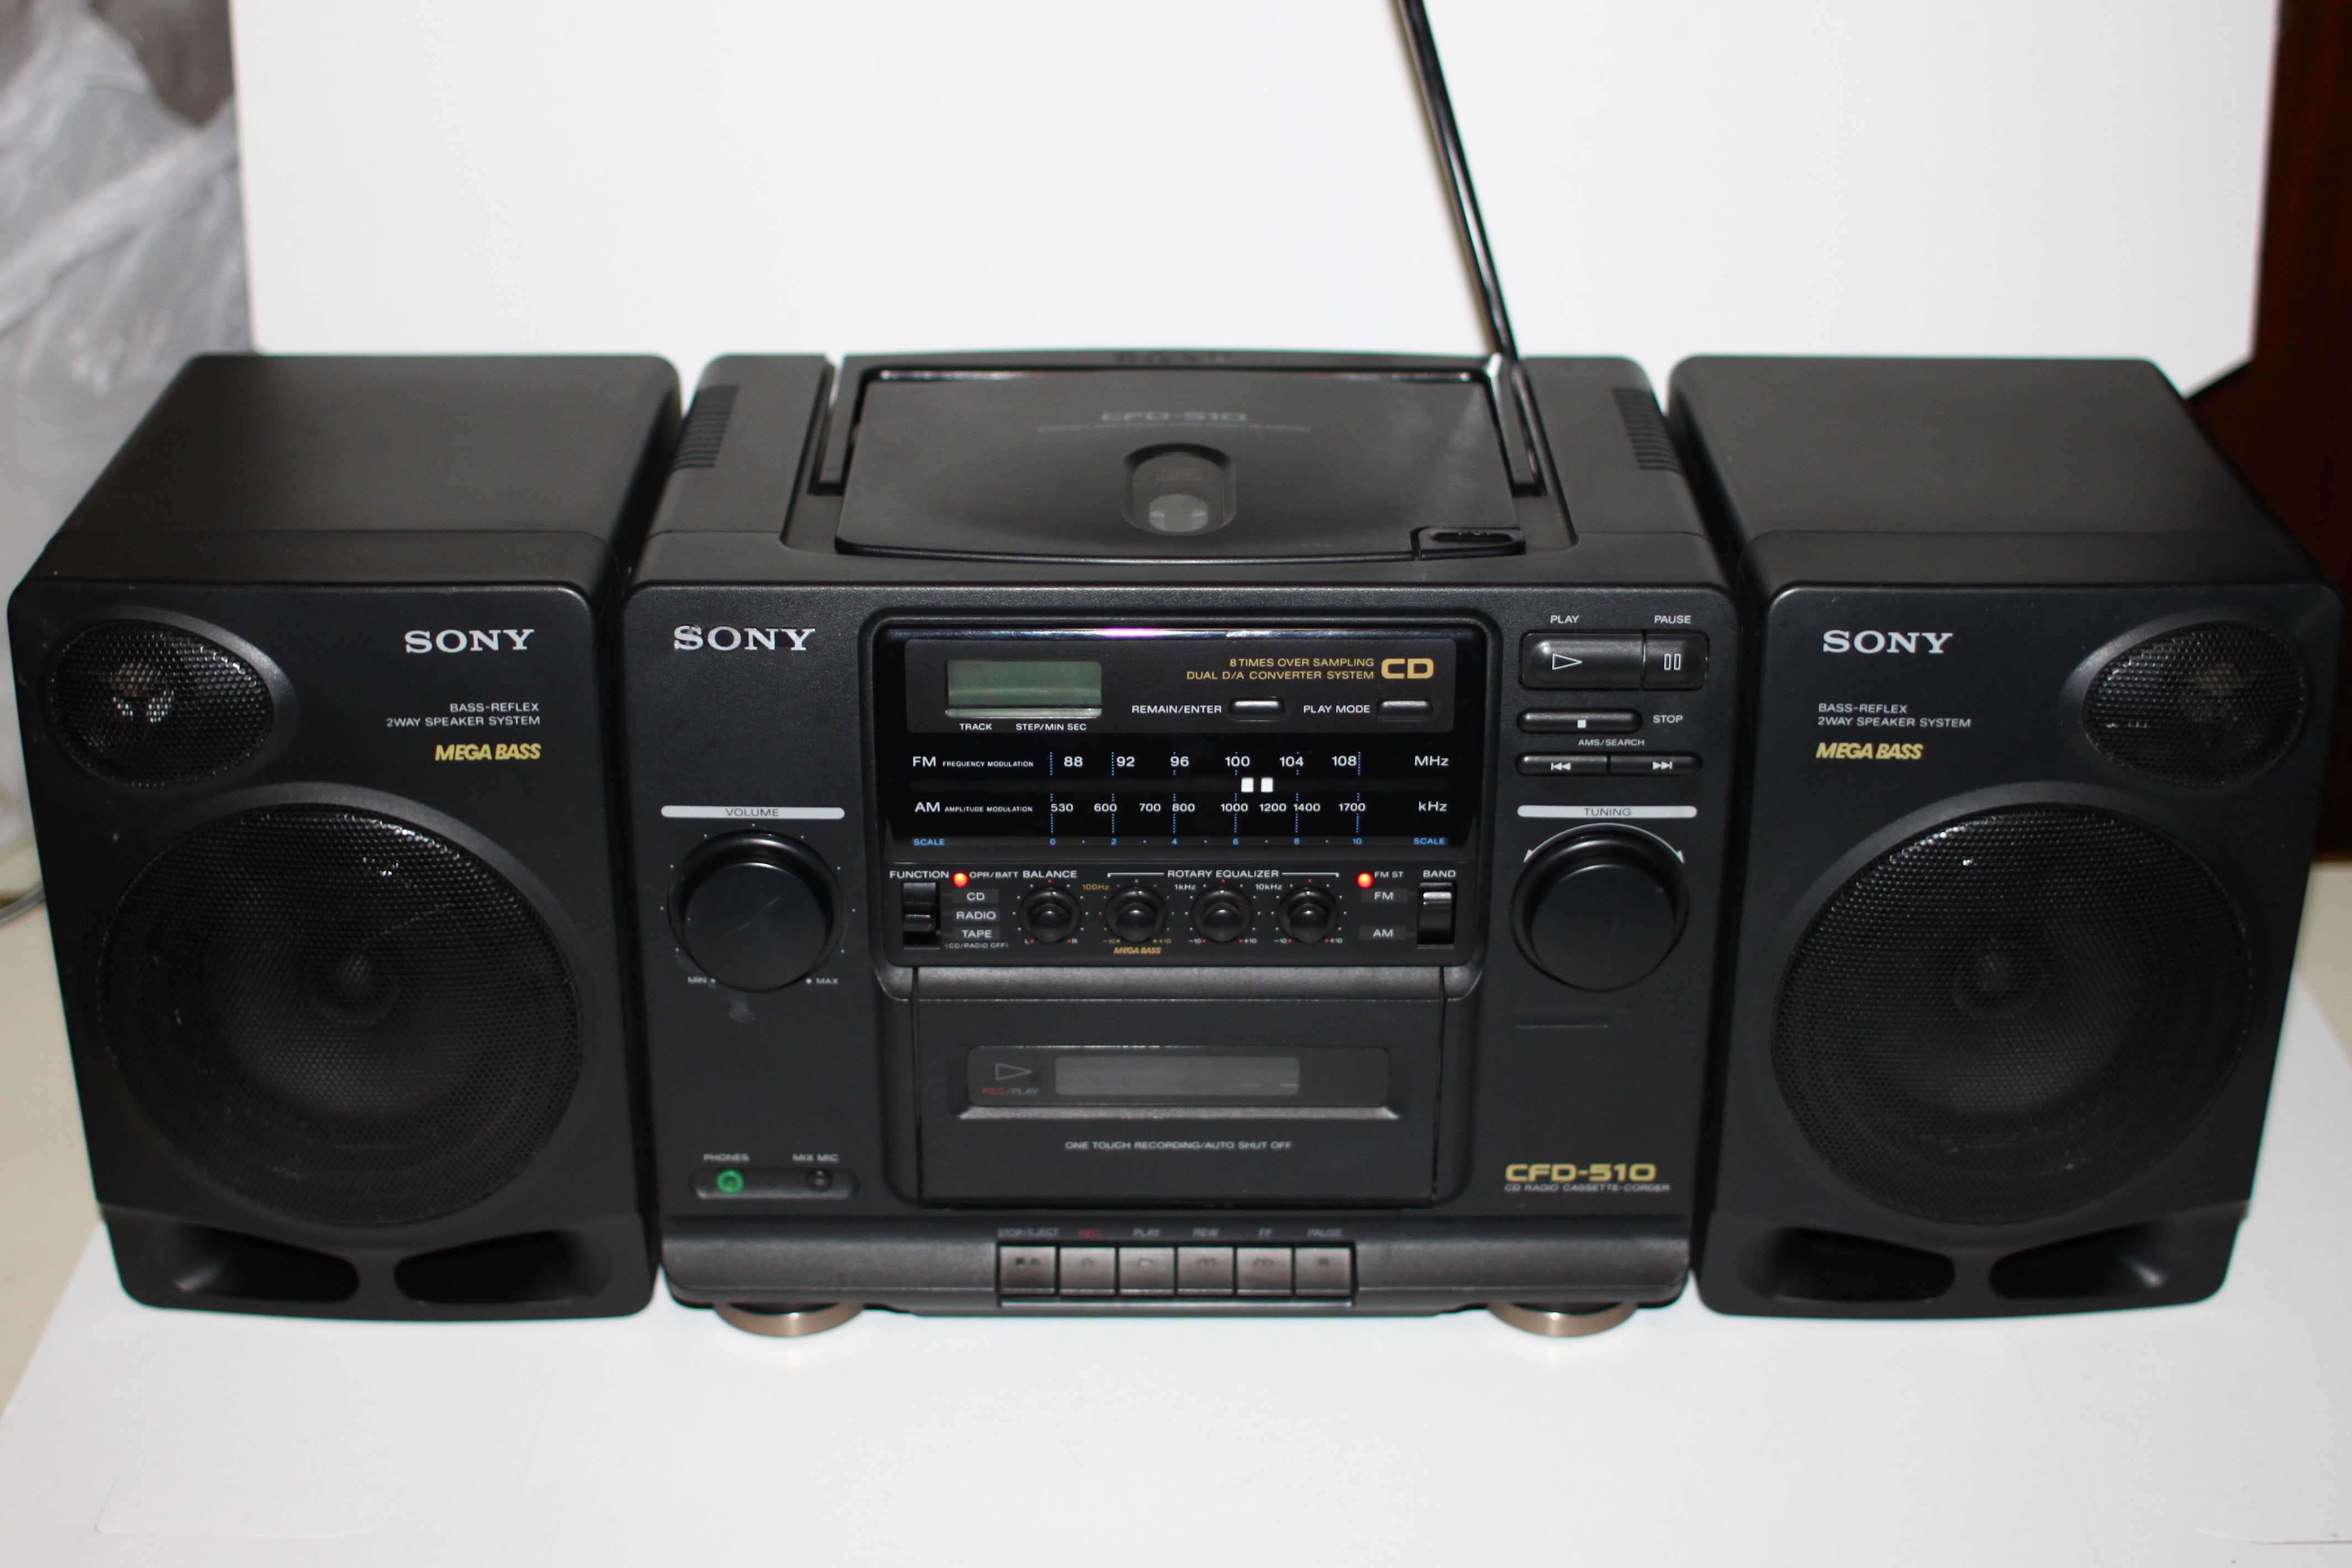 Sony Boombox CFD CD Cassette AM FM Radio Mega Bass With Detachable Speakers EBay